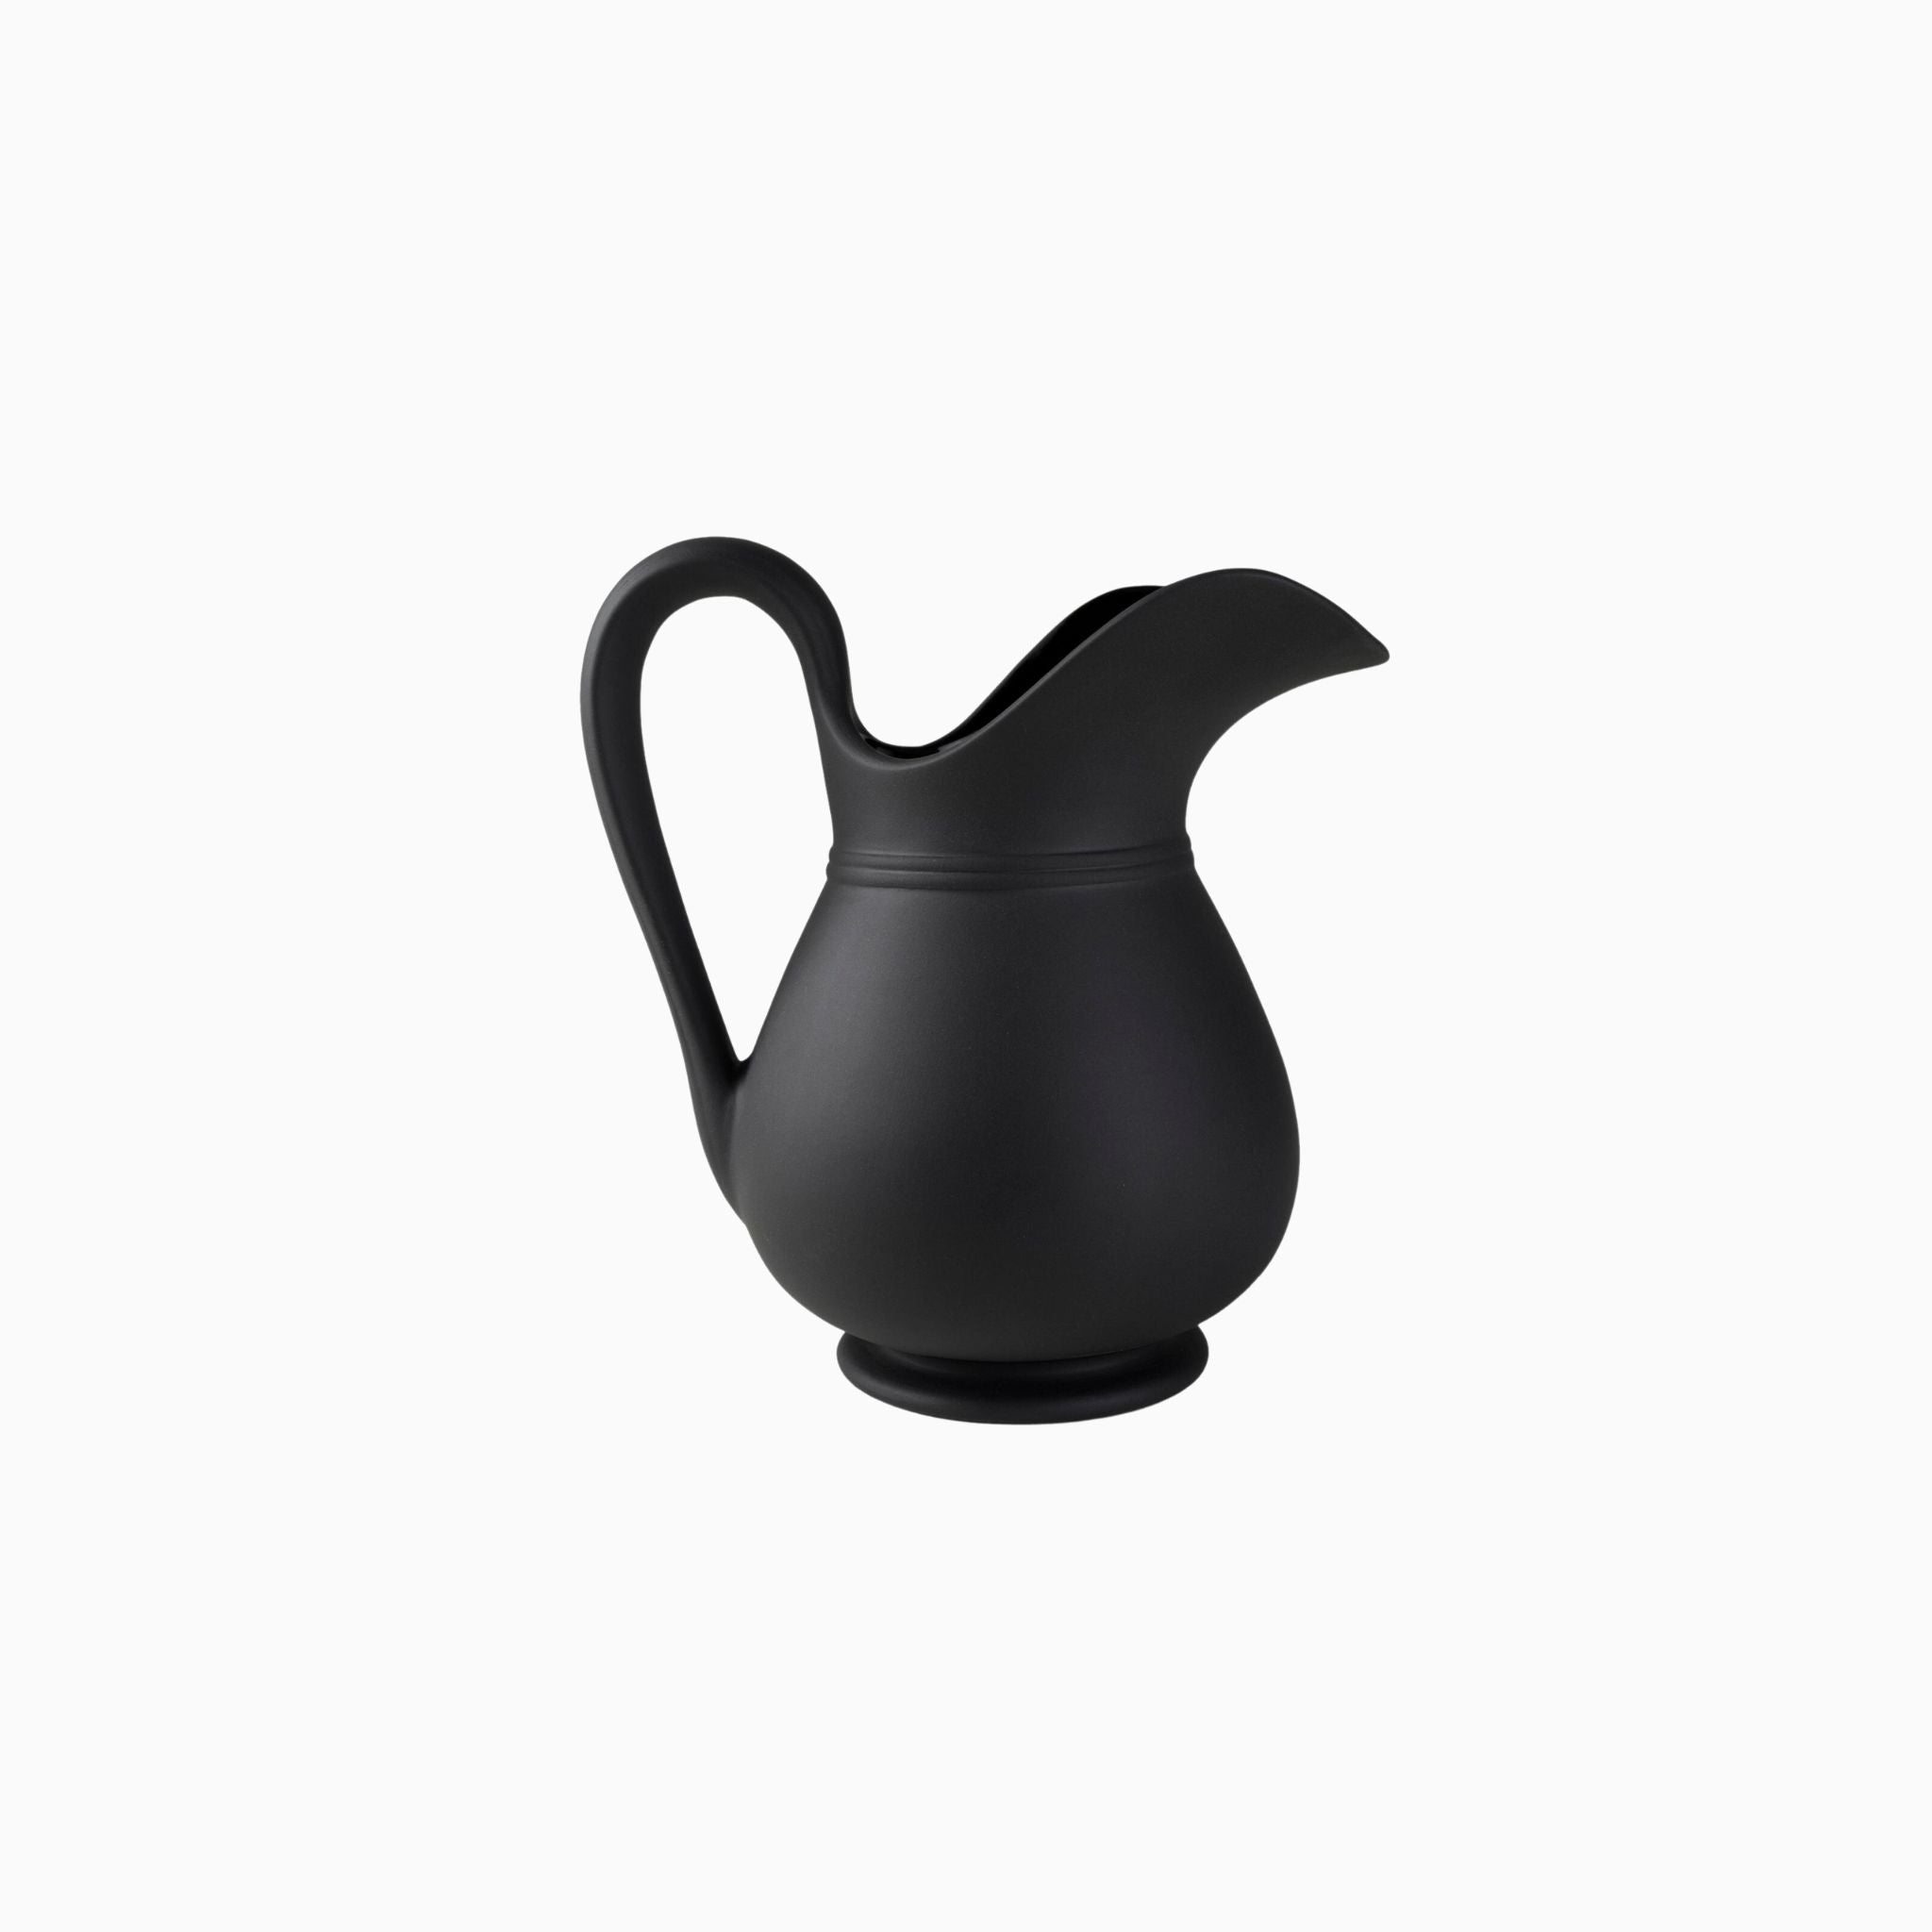 Simply Elevated - Stoneware pitcher meticulously carved by hand and then slip-cast in Sri Lanka. Available in a matte black terracotta with a shiny glazed interior. We love them for serving drinks, holding flowers, or standing proud on the mantel.